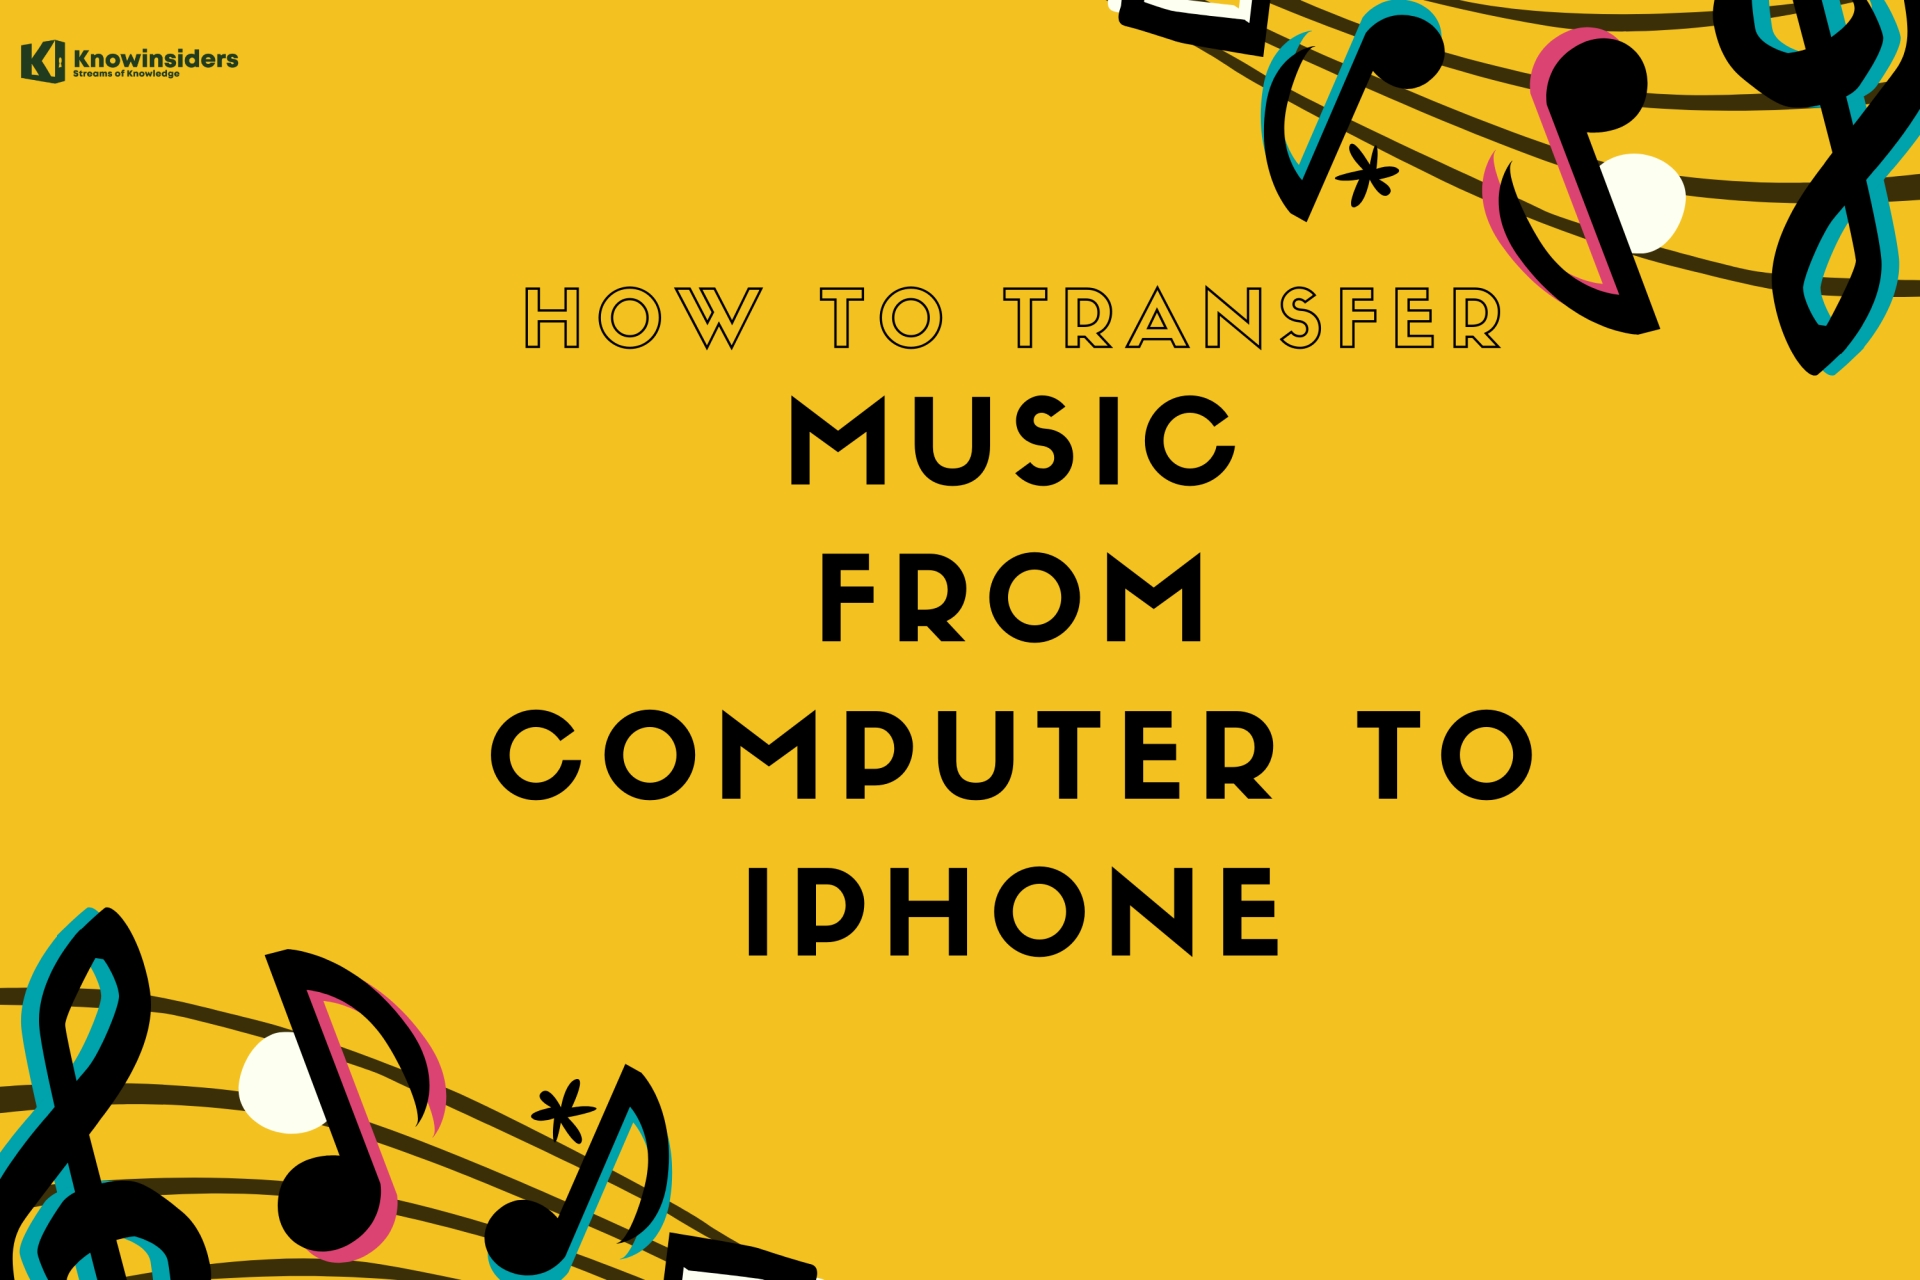 How To Transfer Music, Photo From Computer to iPhone